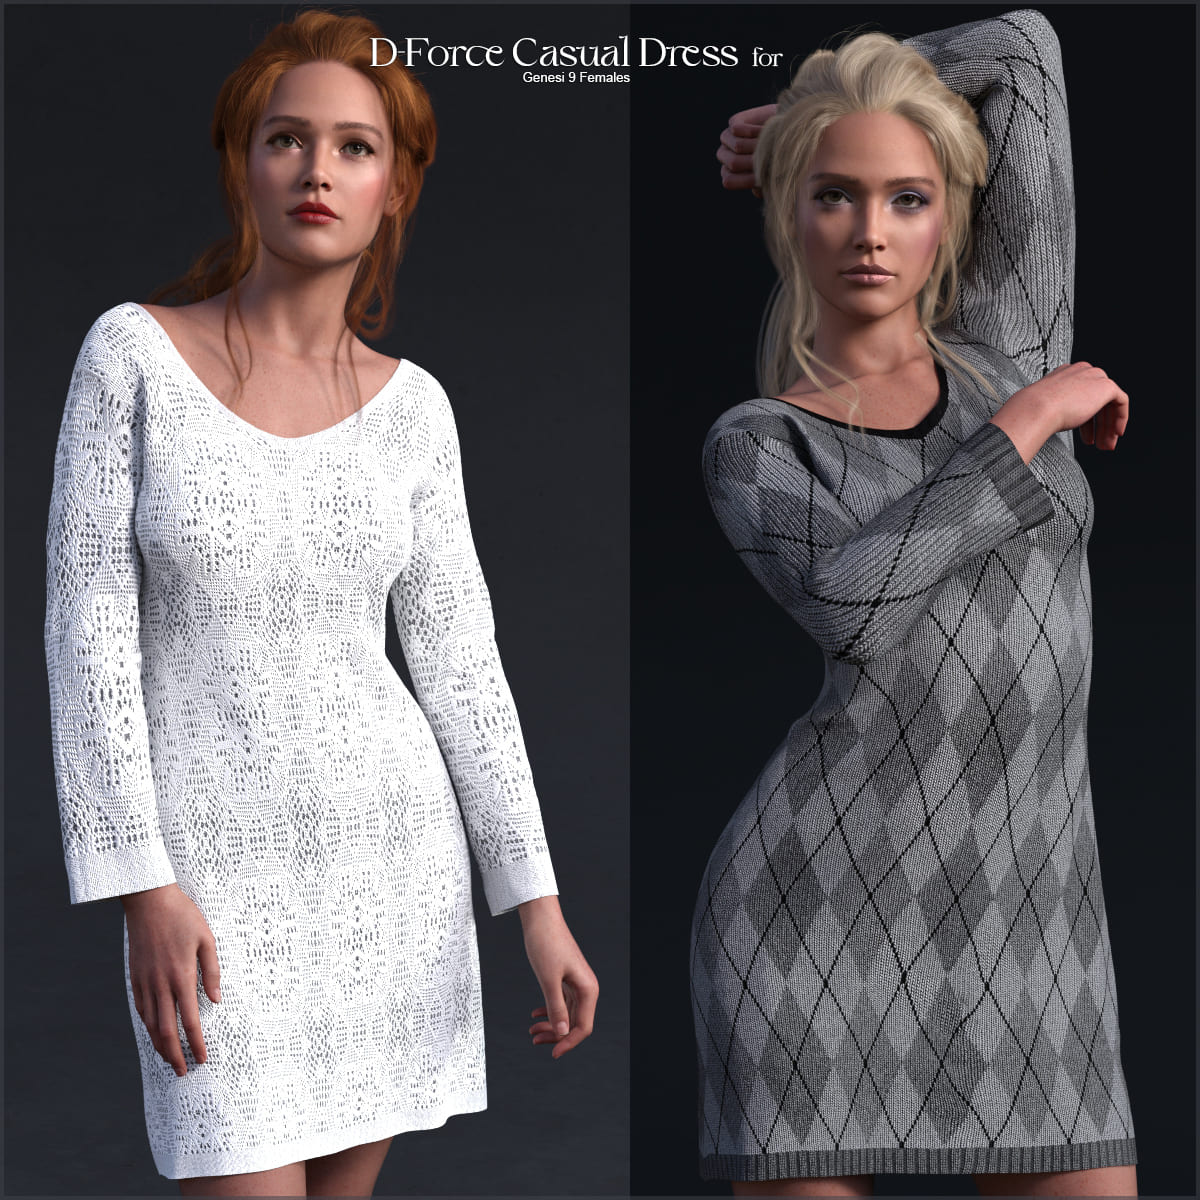 D-Force Casual Dress for G9 Females_DAZ3DDL